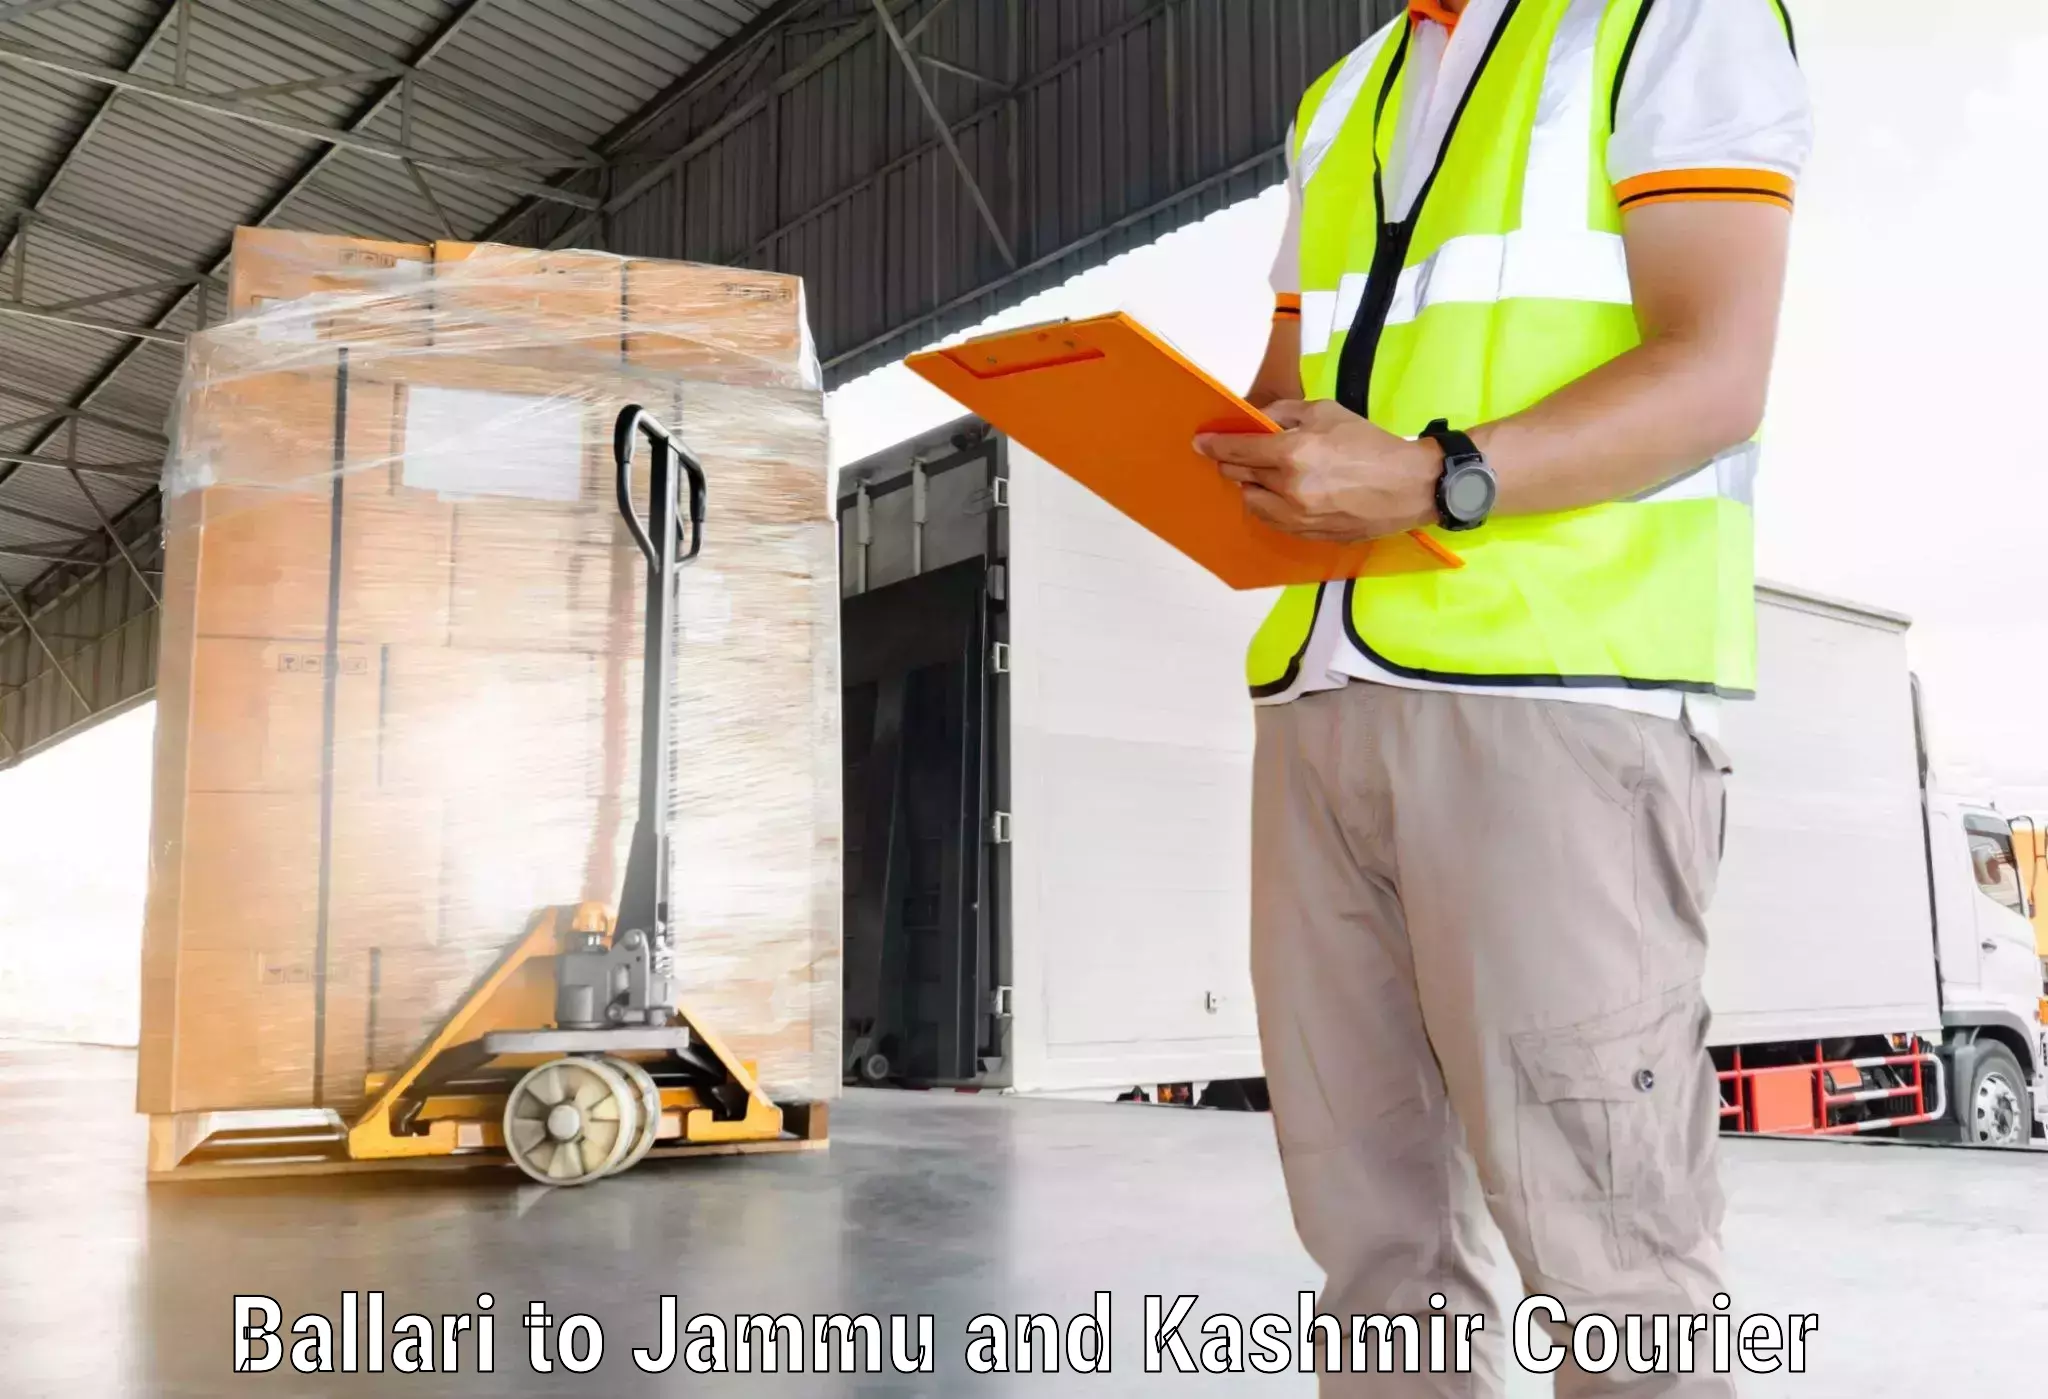 User-friendly delivery service Ballari to Jammu and Kashmir